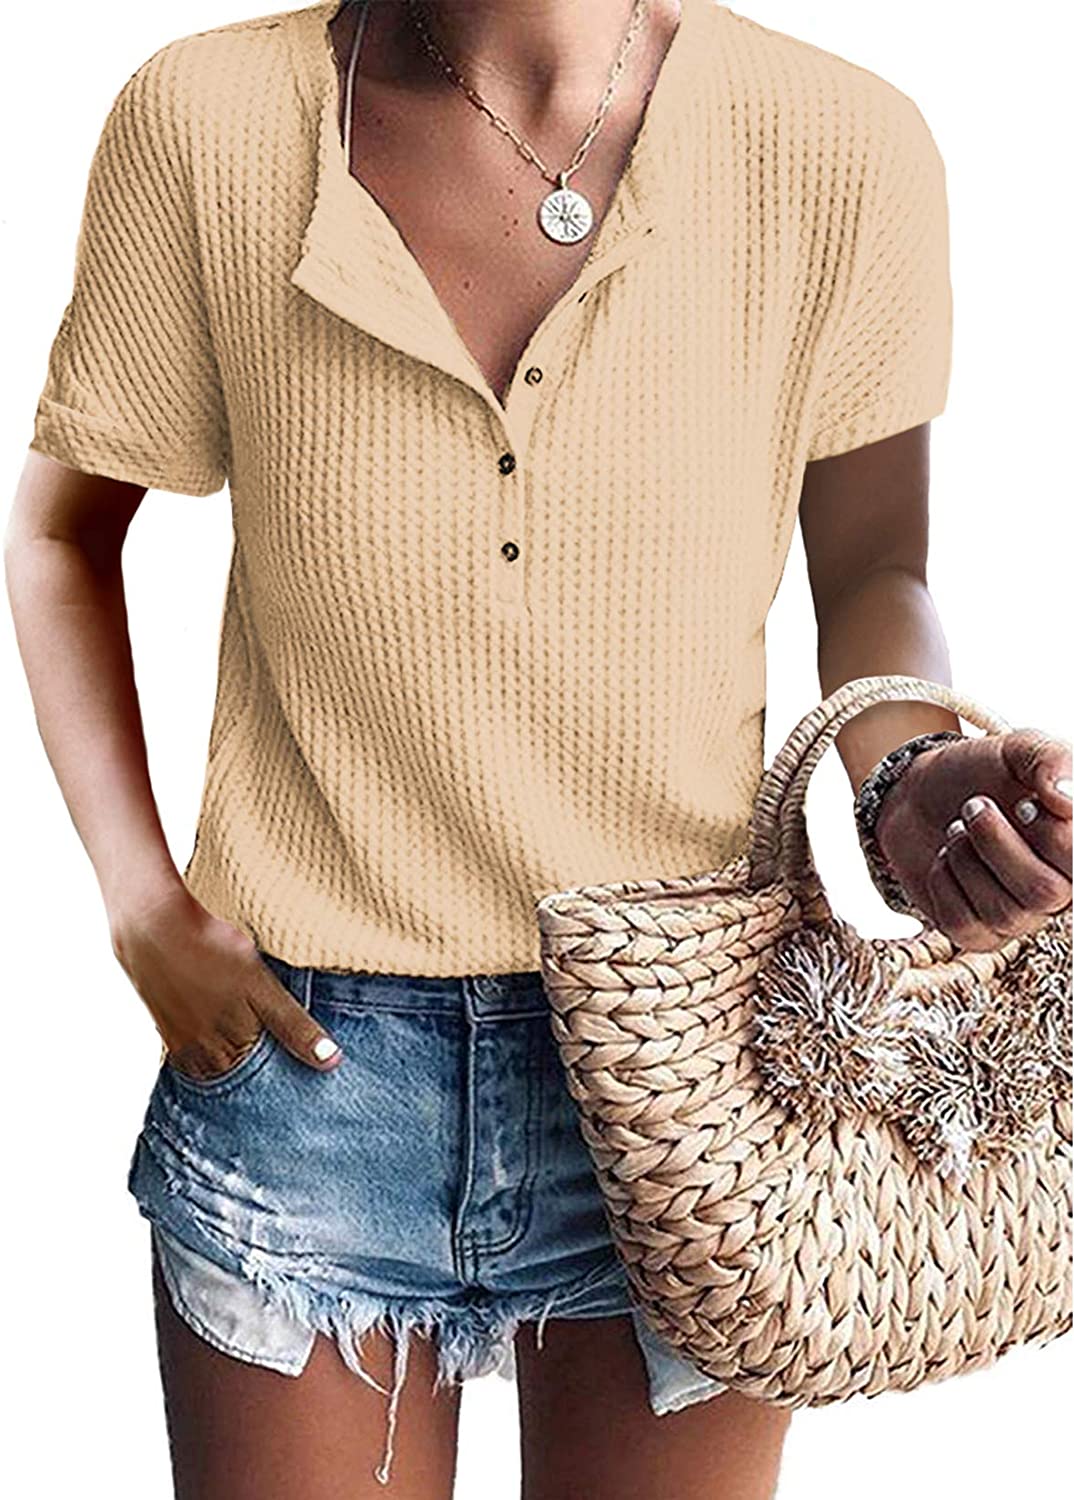 Tank Tops for Women,Waffle Knit Tunic Tops Loose Sleeveless Button Up V Neck Henley Shirts 